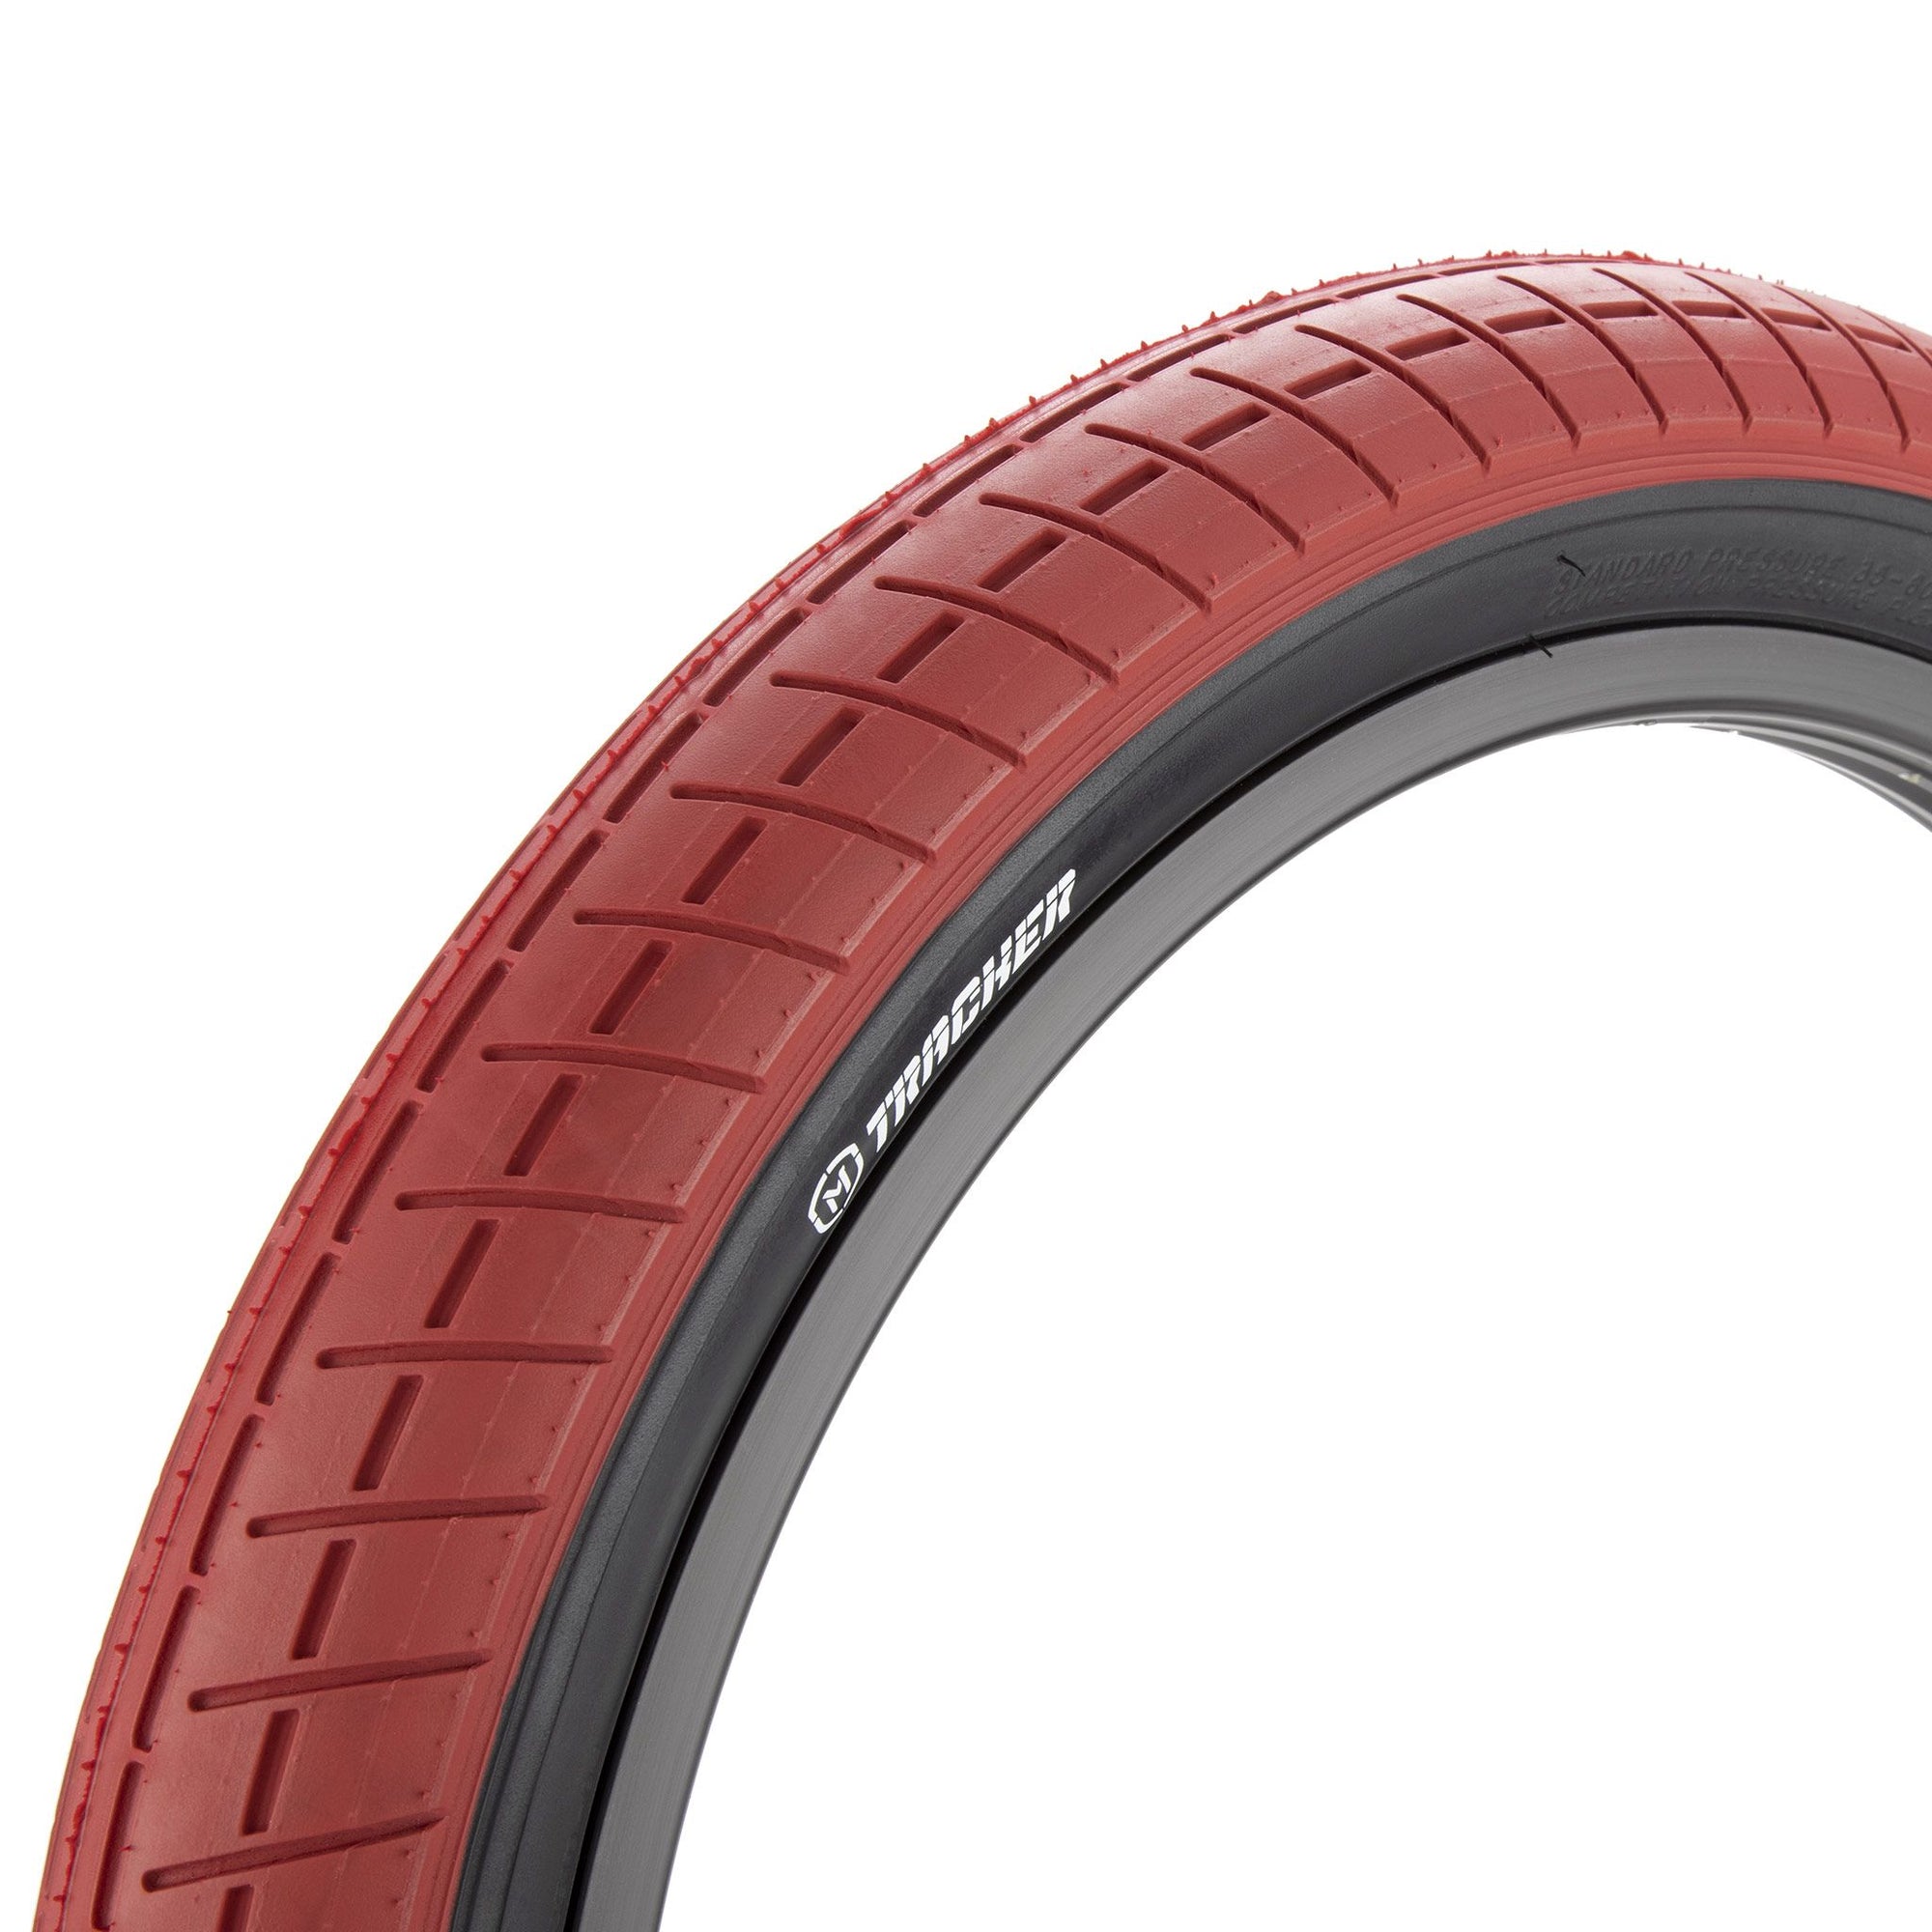 Mission Tracker Tire (Various Colors)